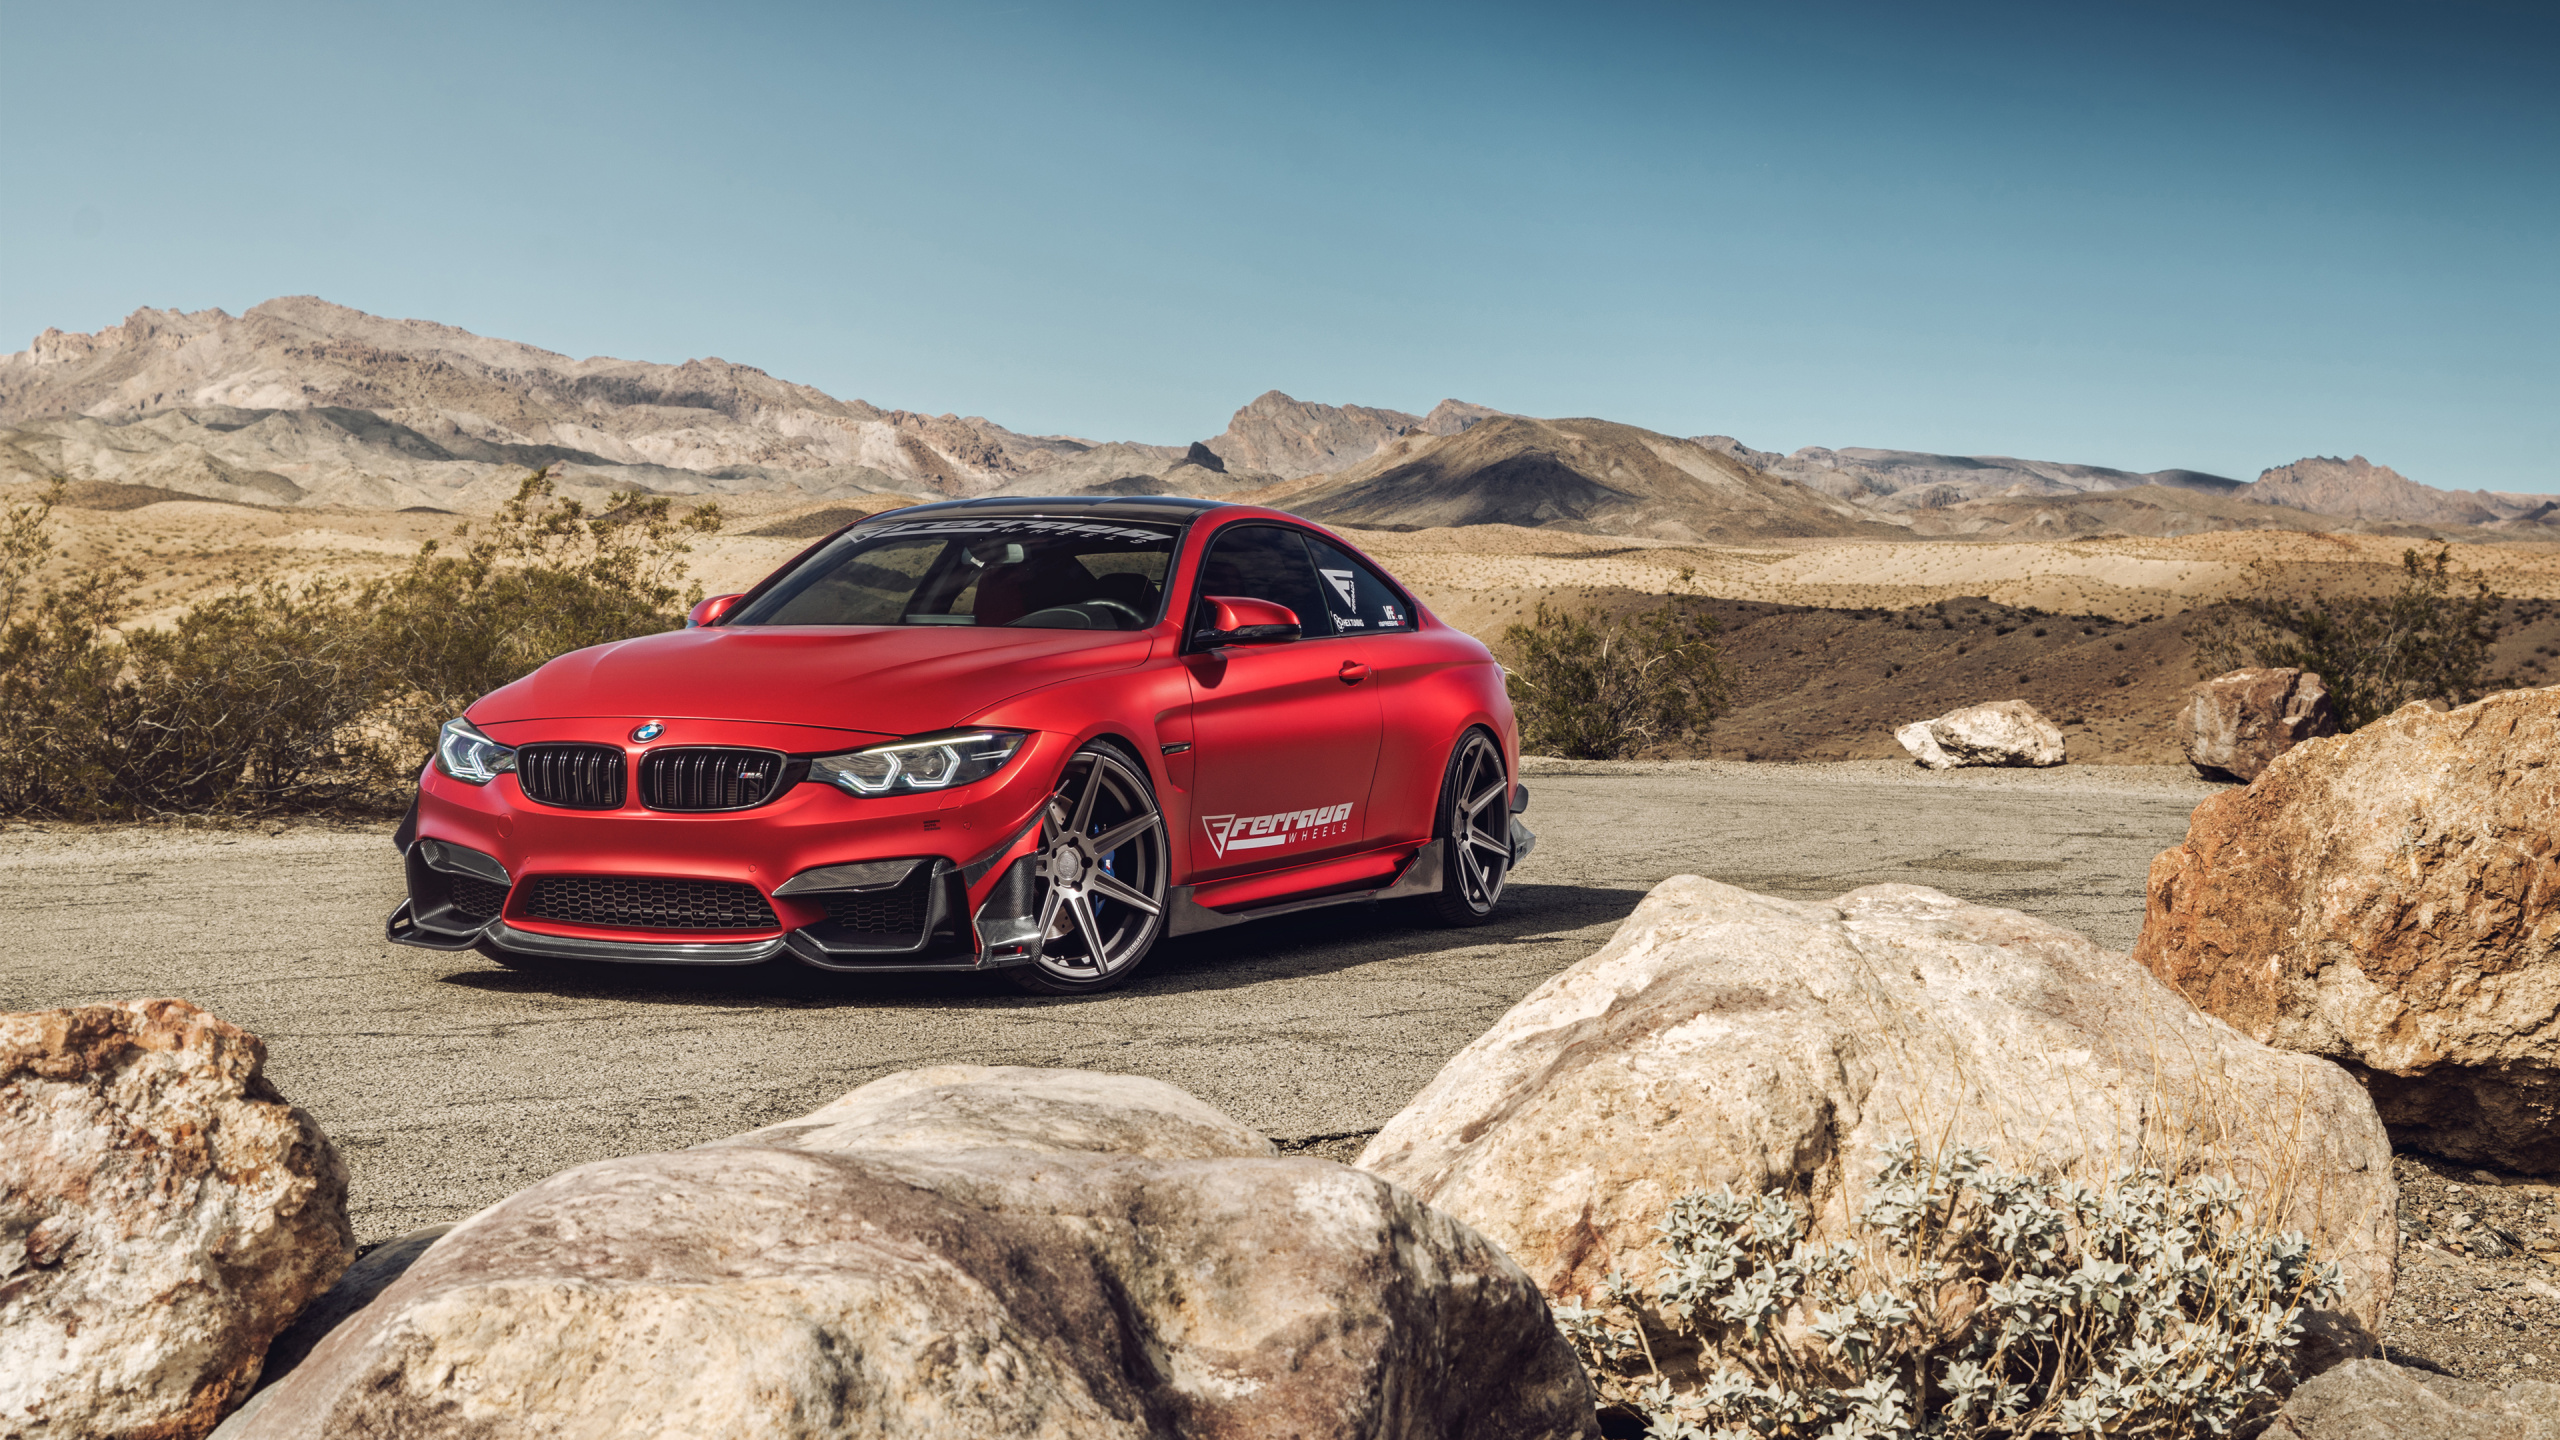 Red Bmw m 3 on Rocky Mountain During Daytime. Wallpaper in 2560x1440 Resolution